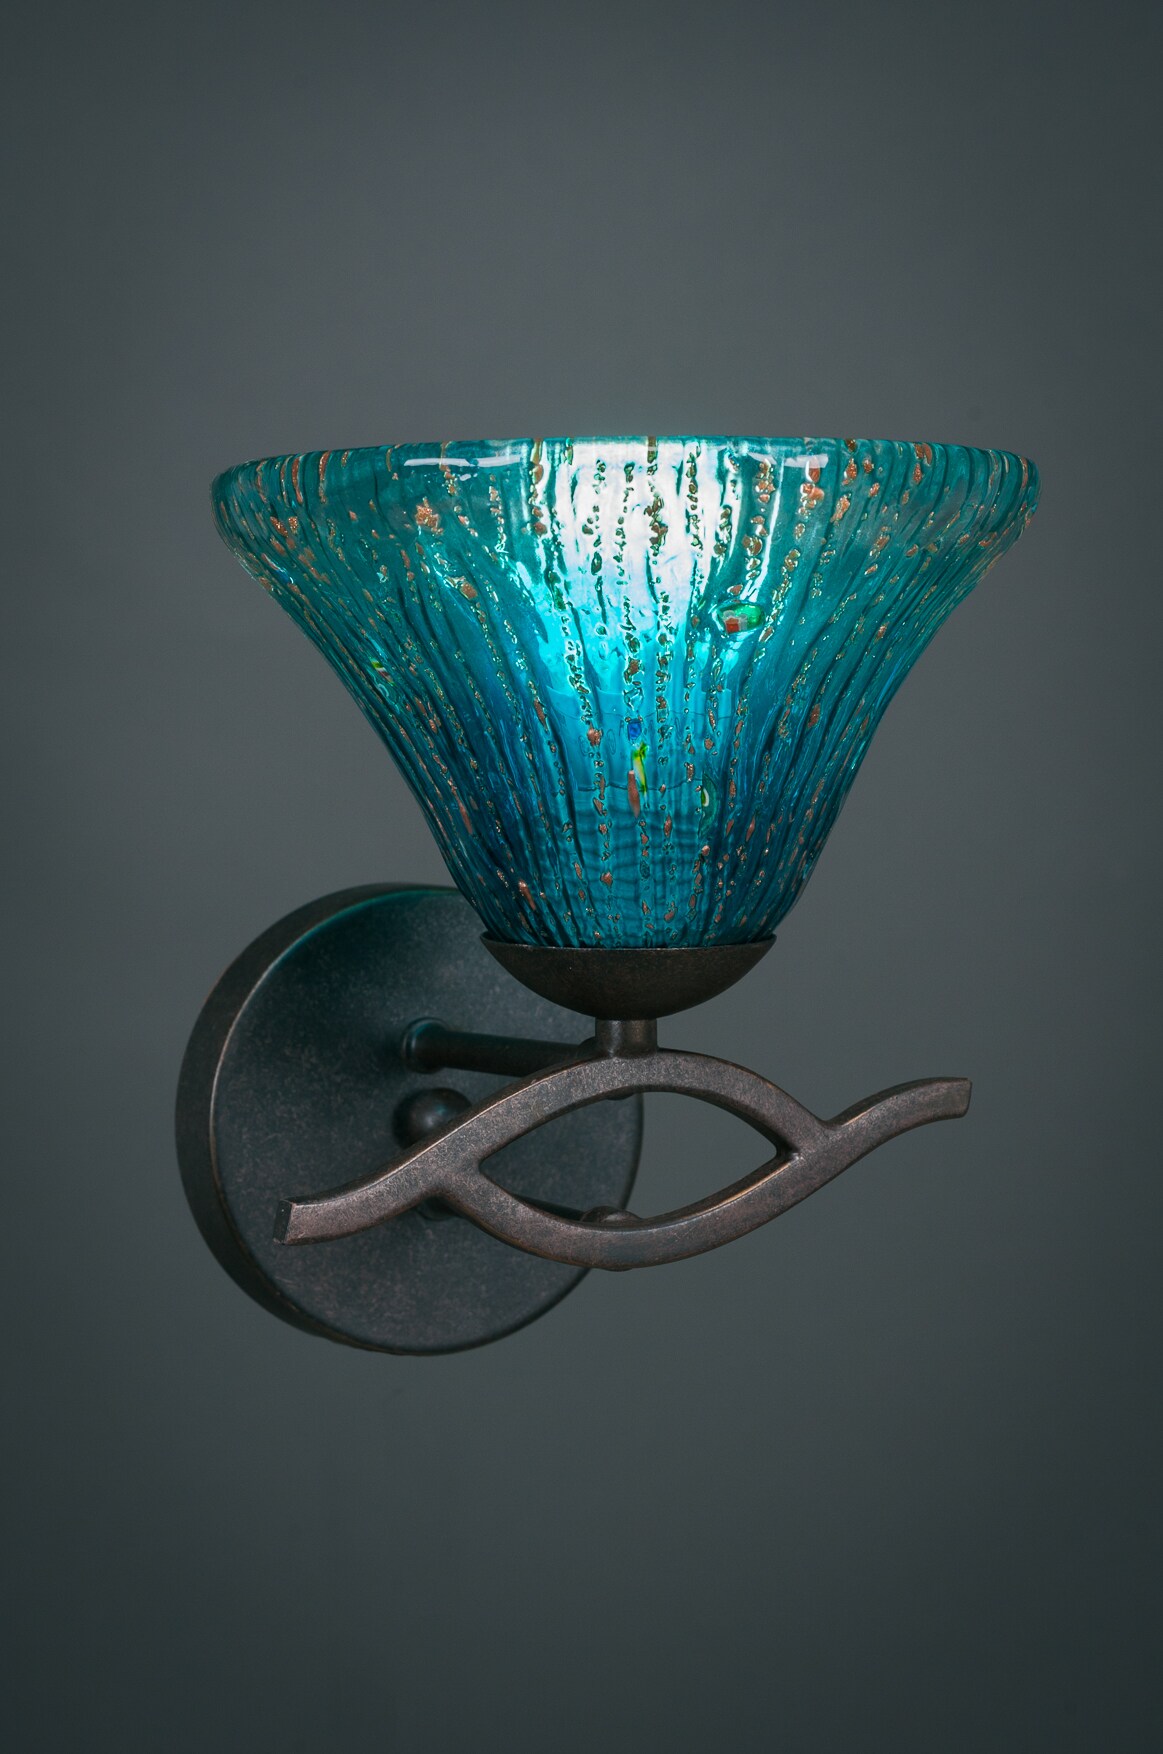 Revo Wall Sconce Shown In Dark Granite Finish With 7 Teal Crystal Glass